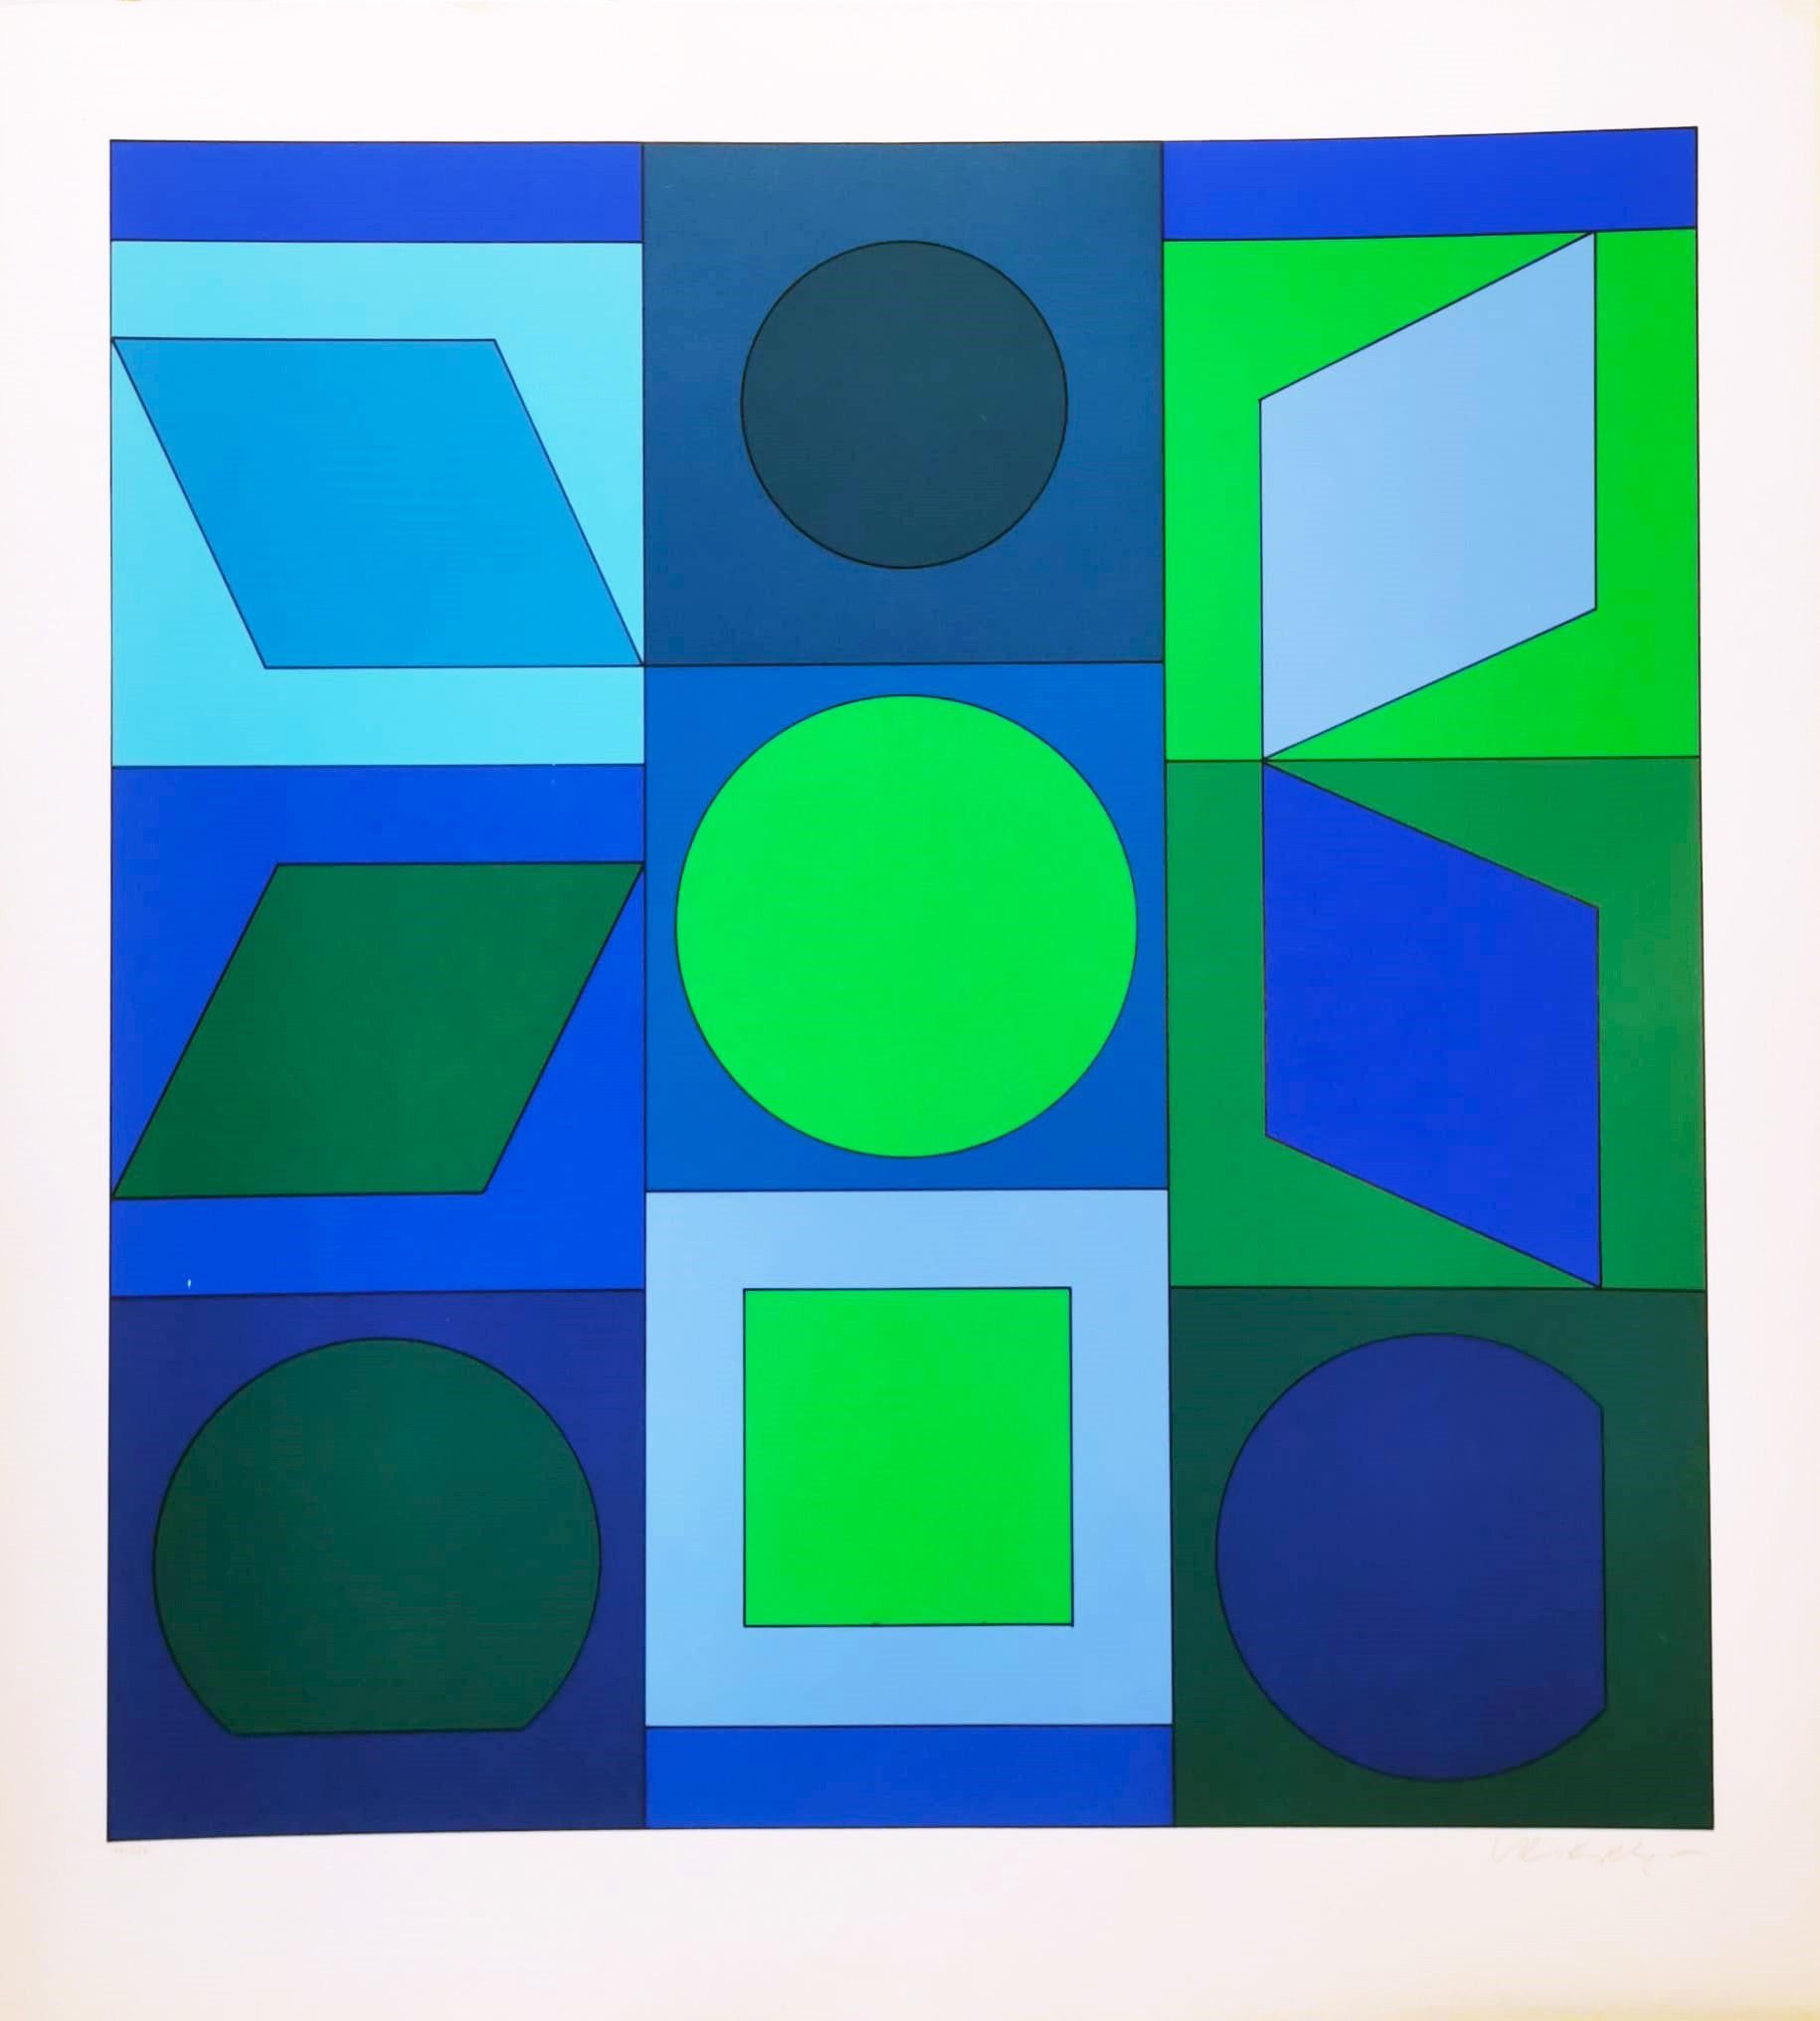 What are some facts about Victor Vasarely?